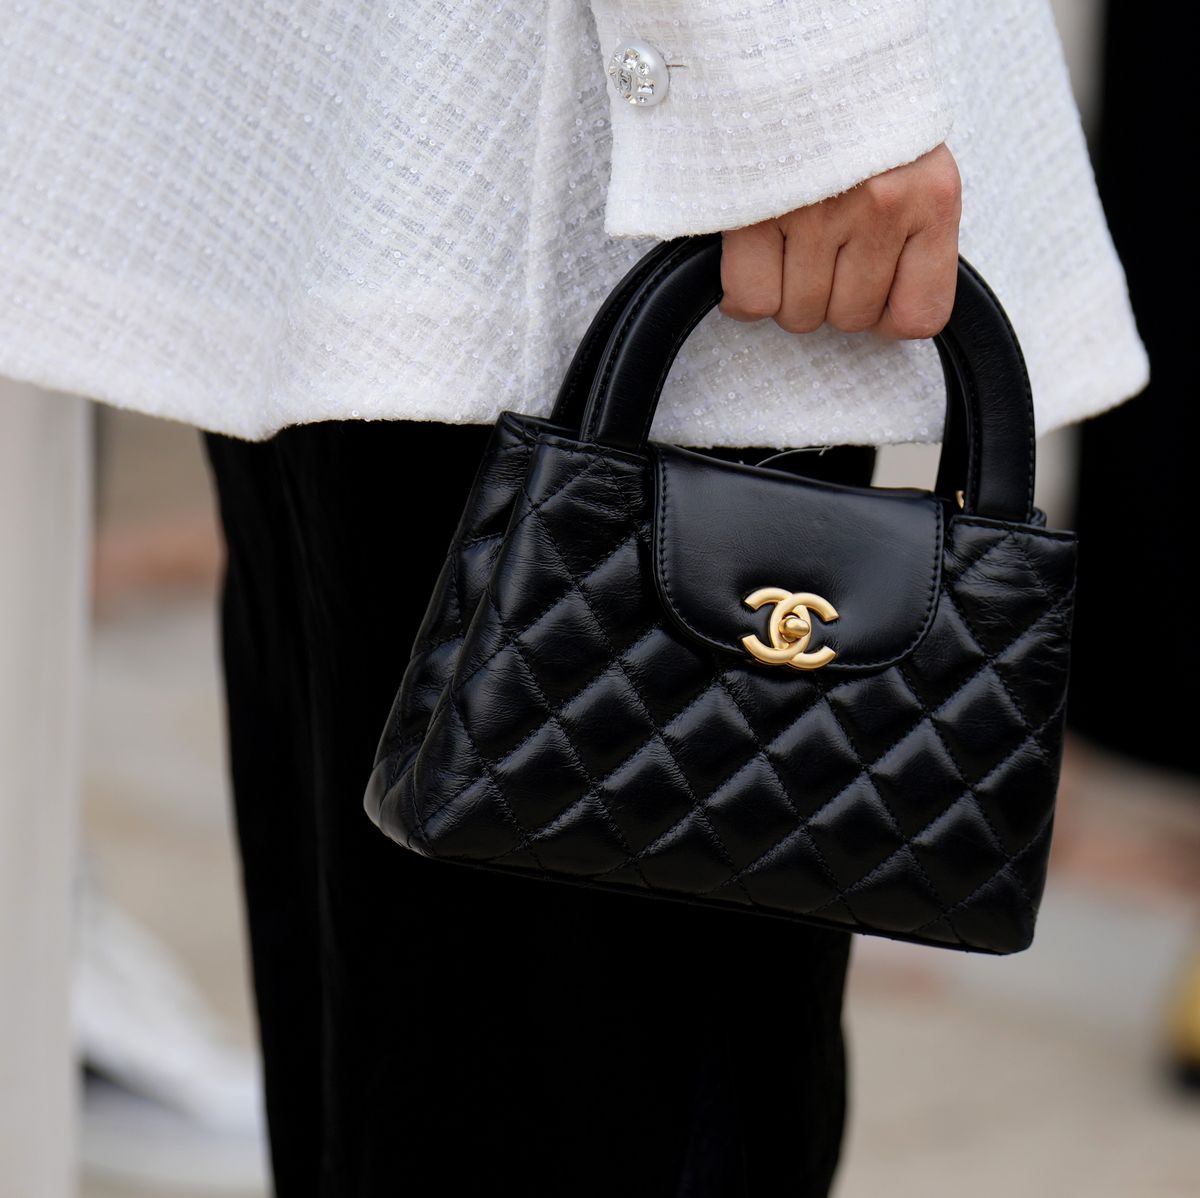 sell chanel bags